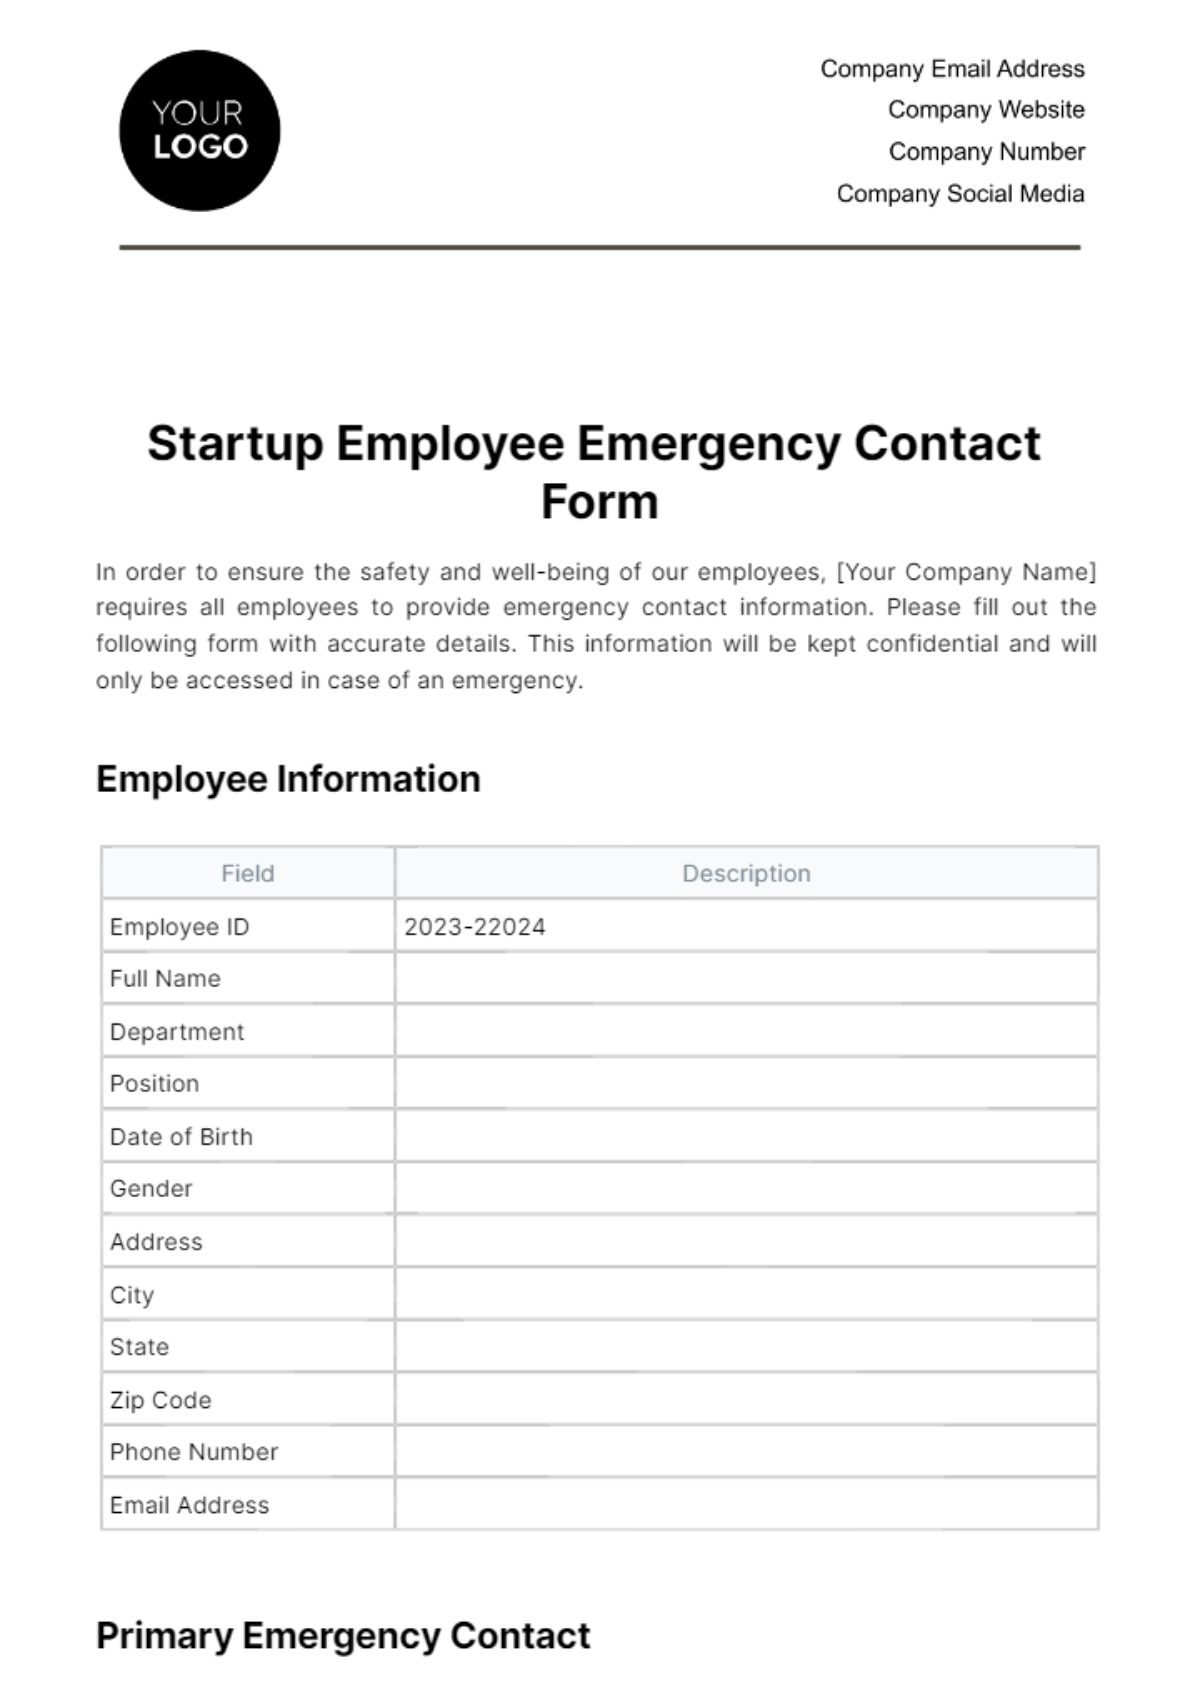 Free Startup Employee Emergency Contact Form Template